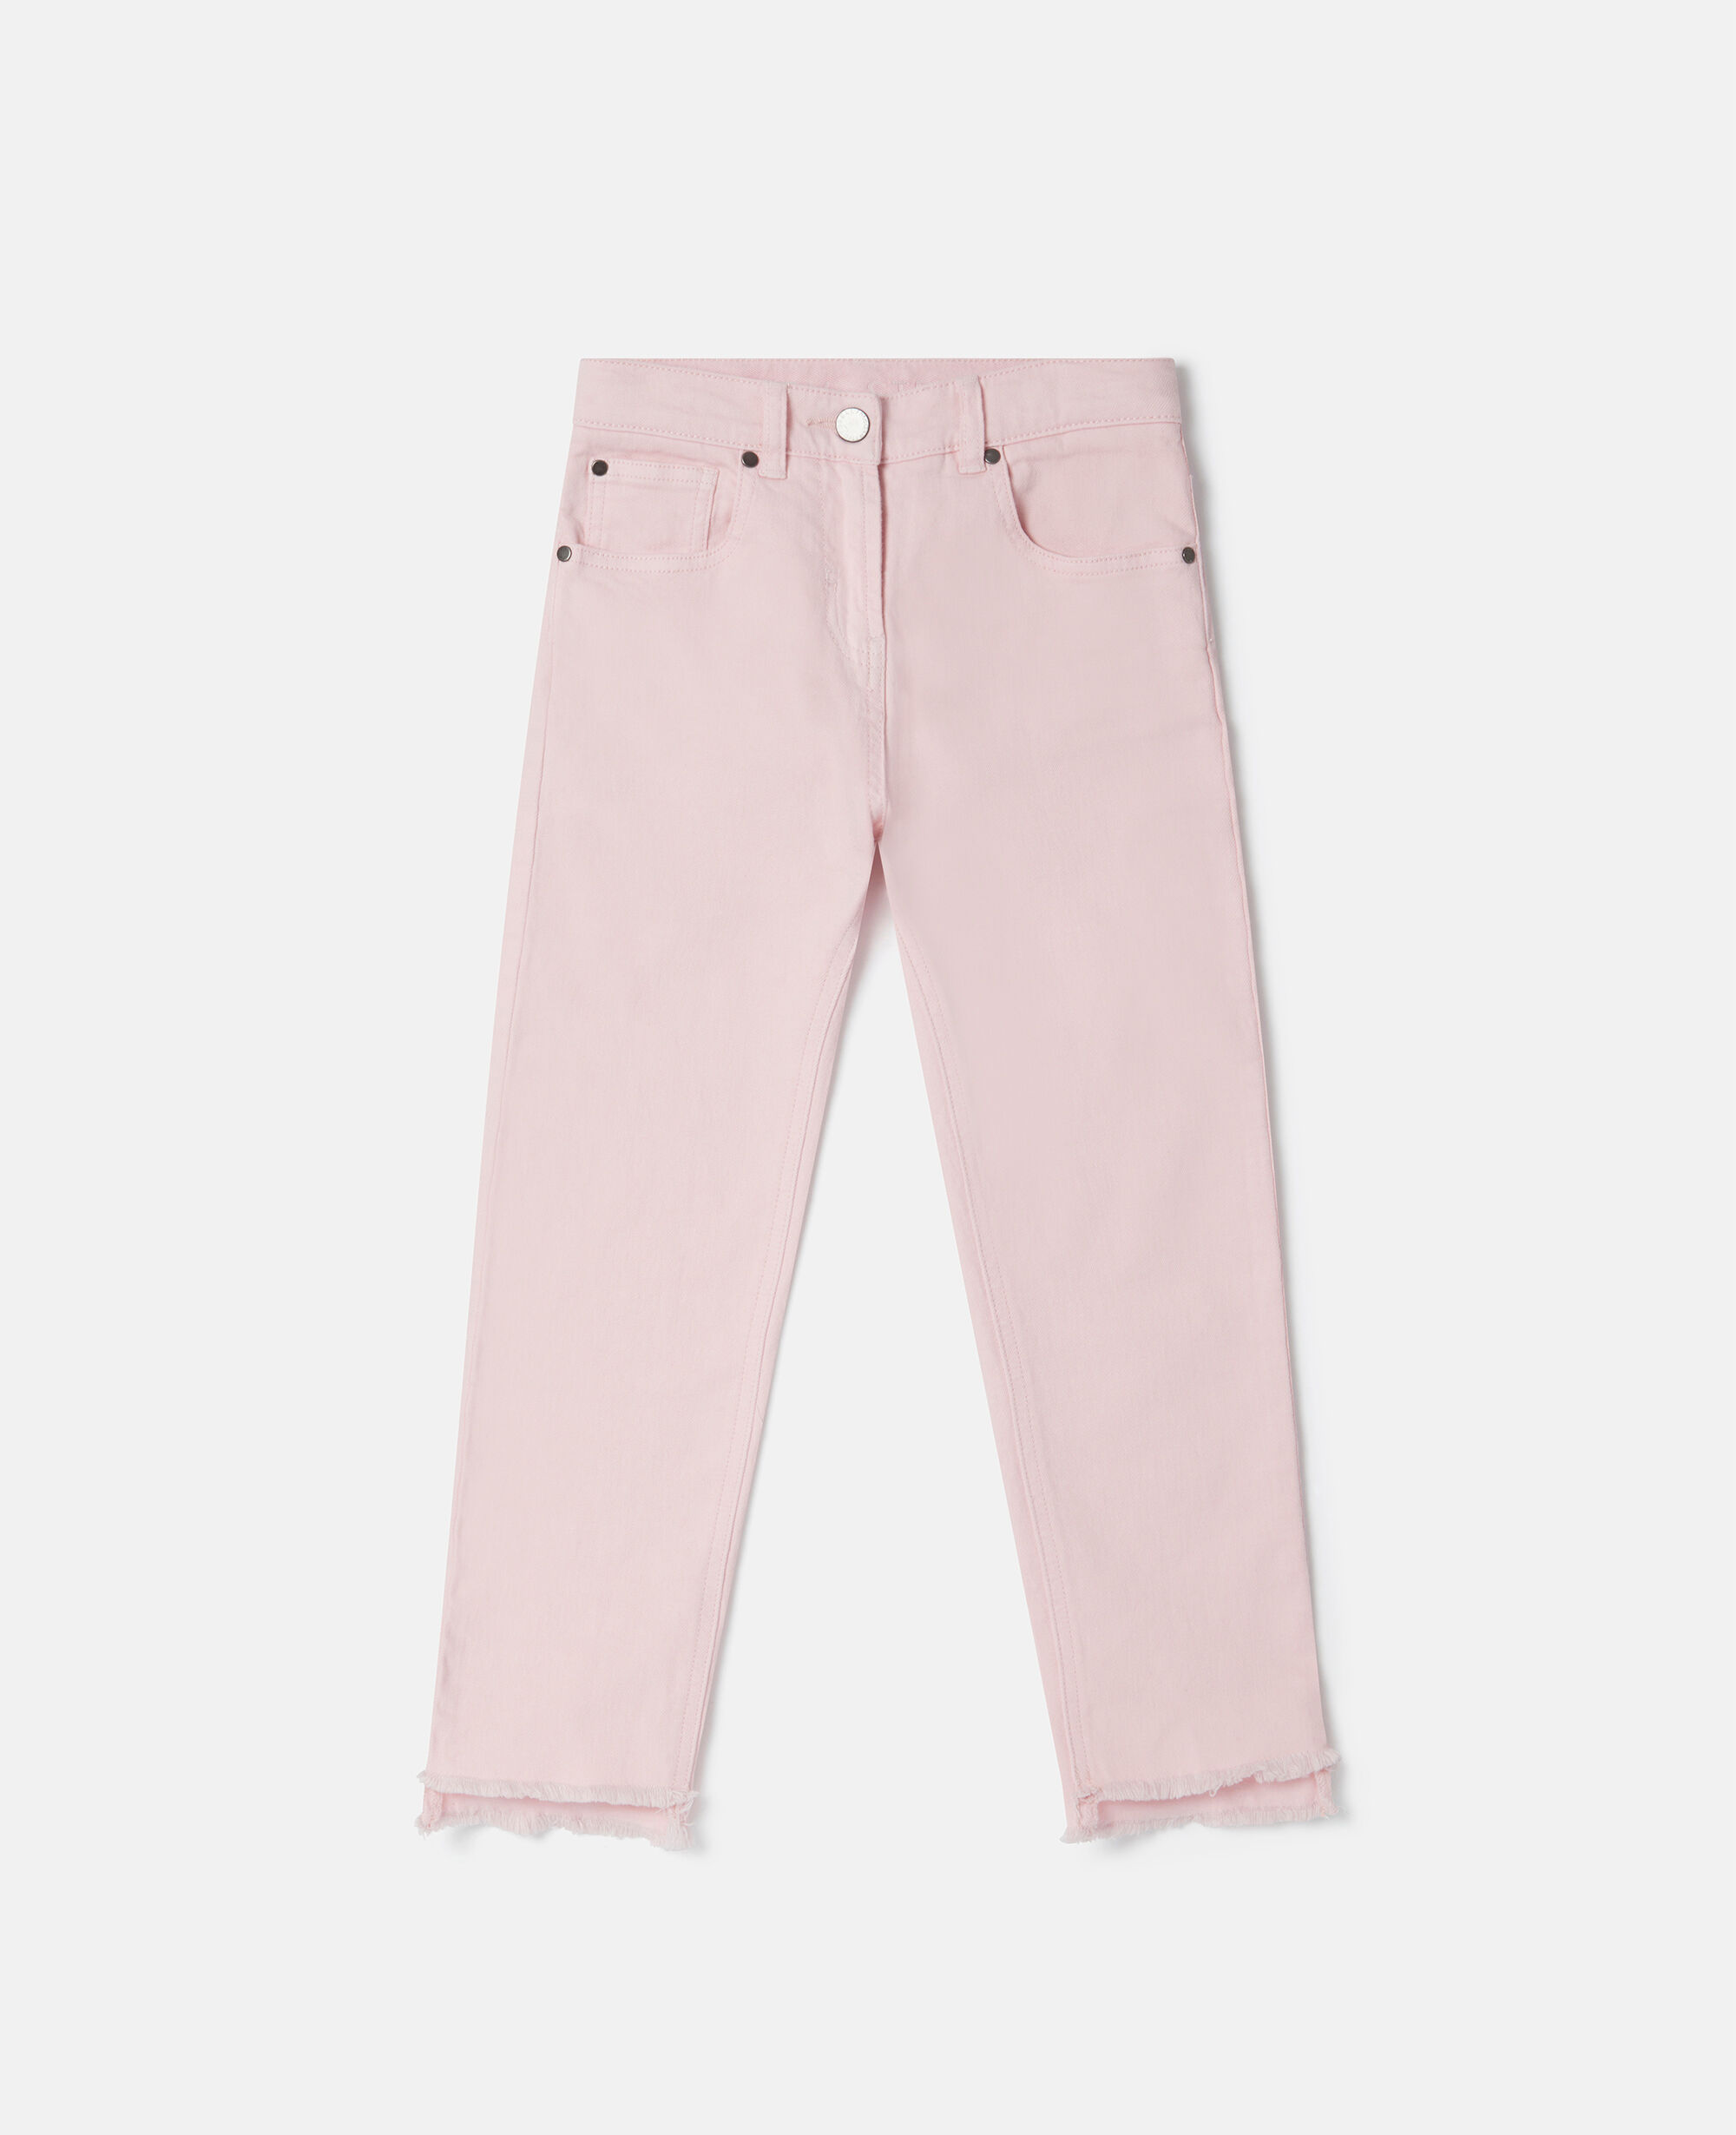 You're Cute Cargo Jeans ☆ Pink – Rock N Rags